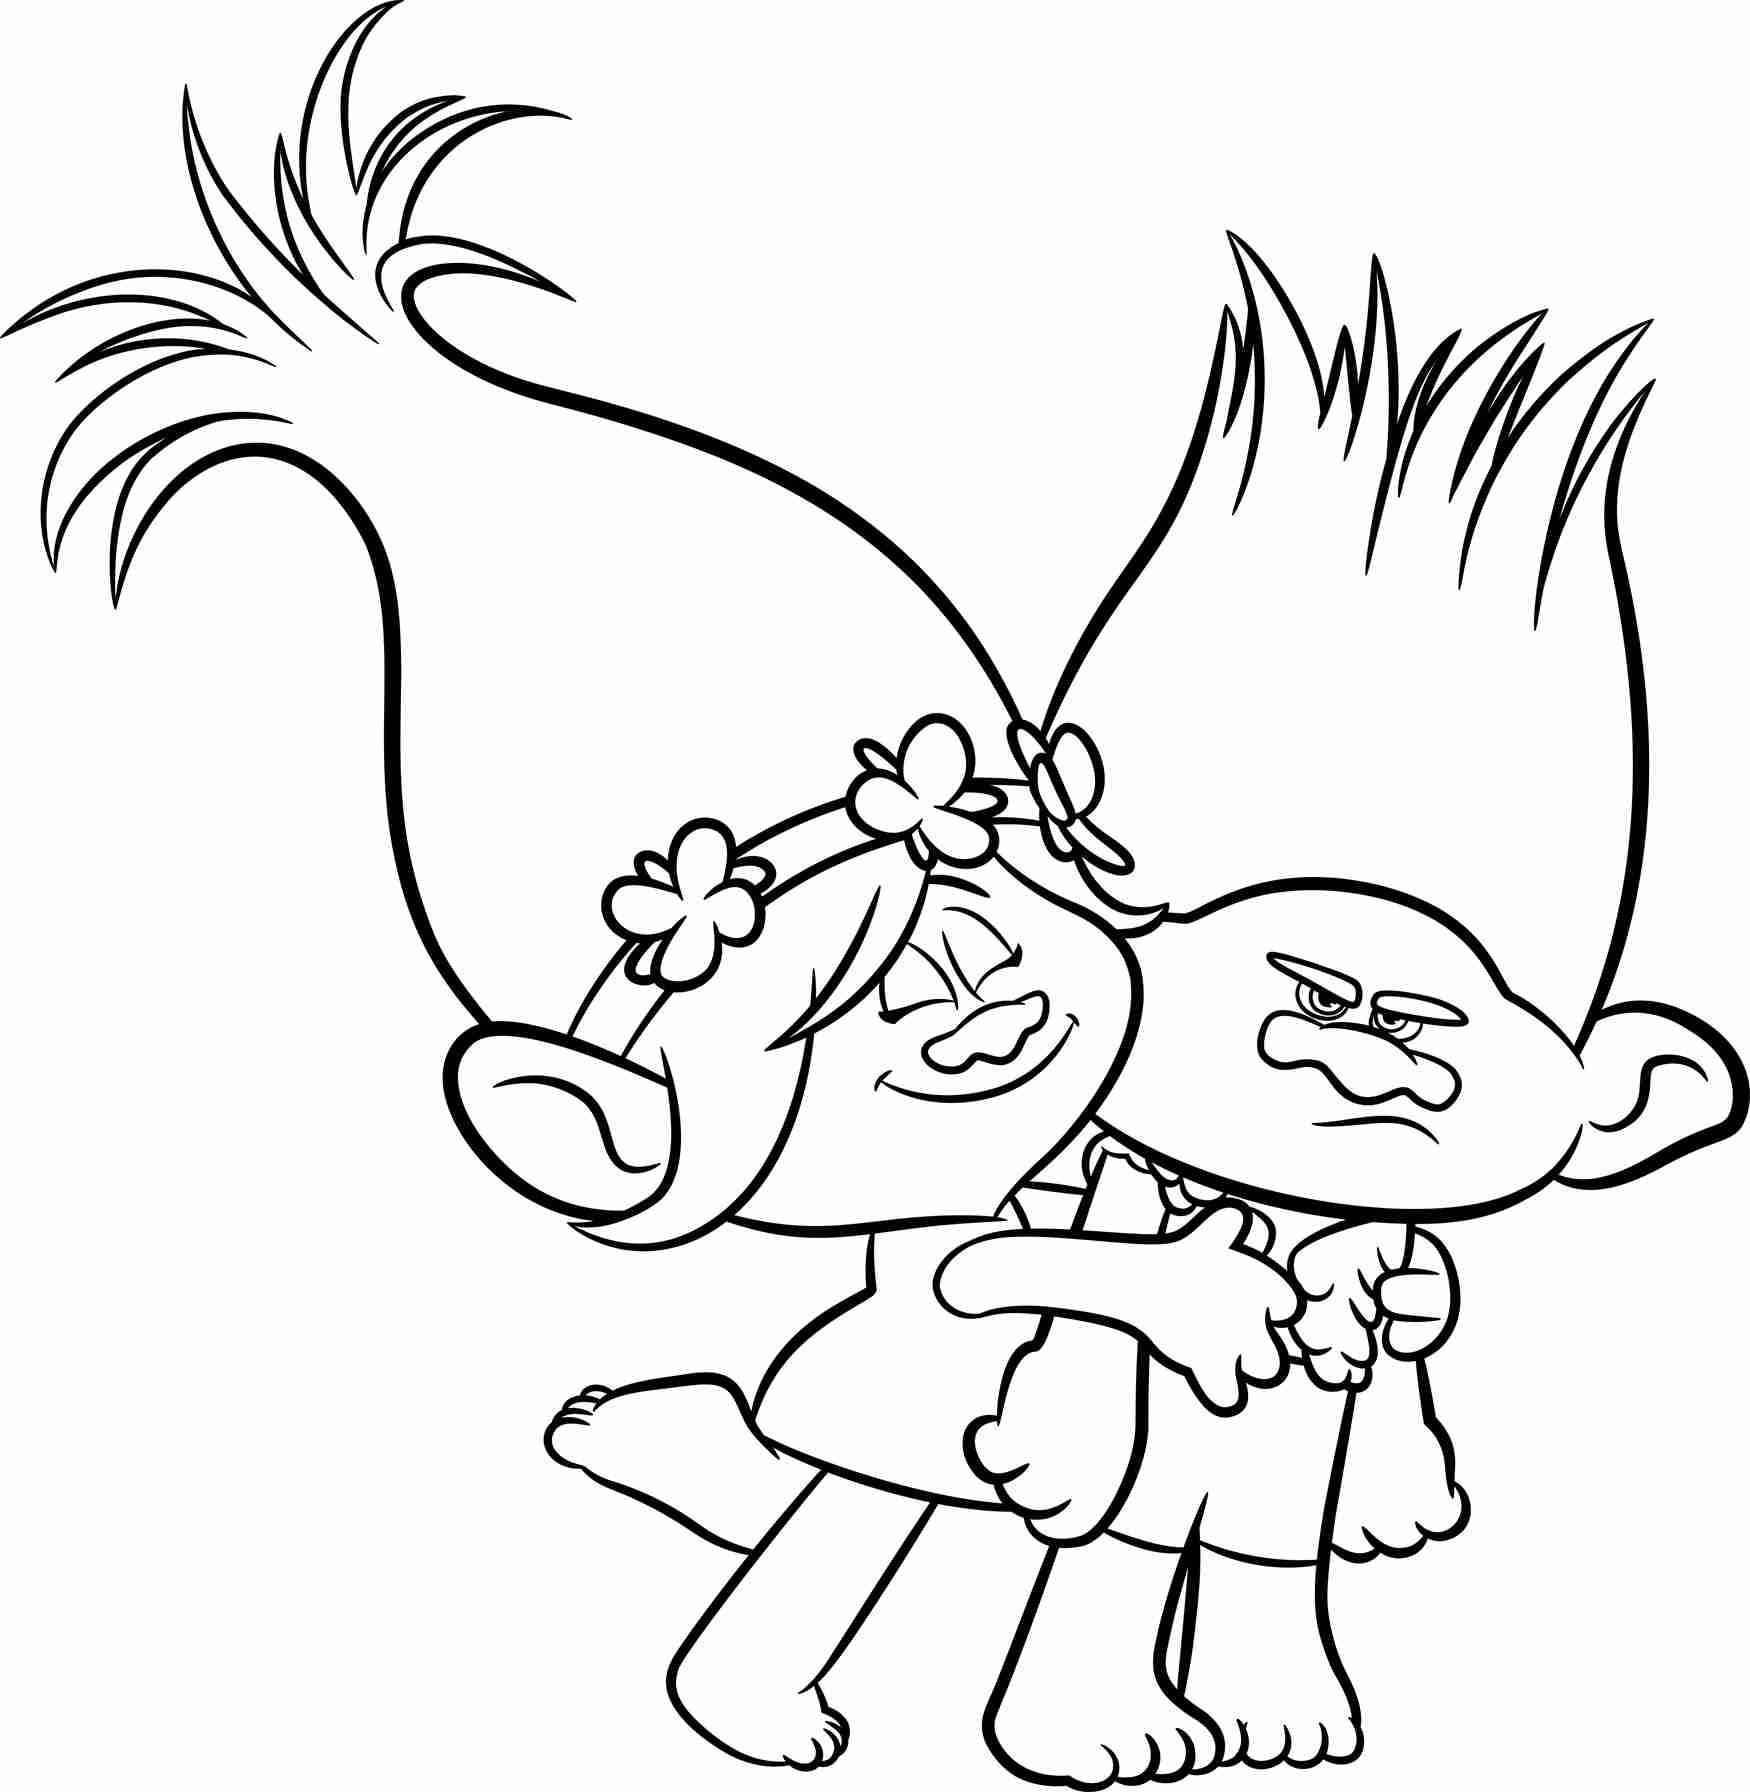 Poppy Trolls Coloring Pages.